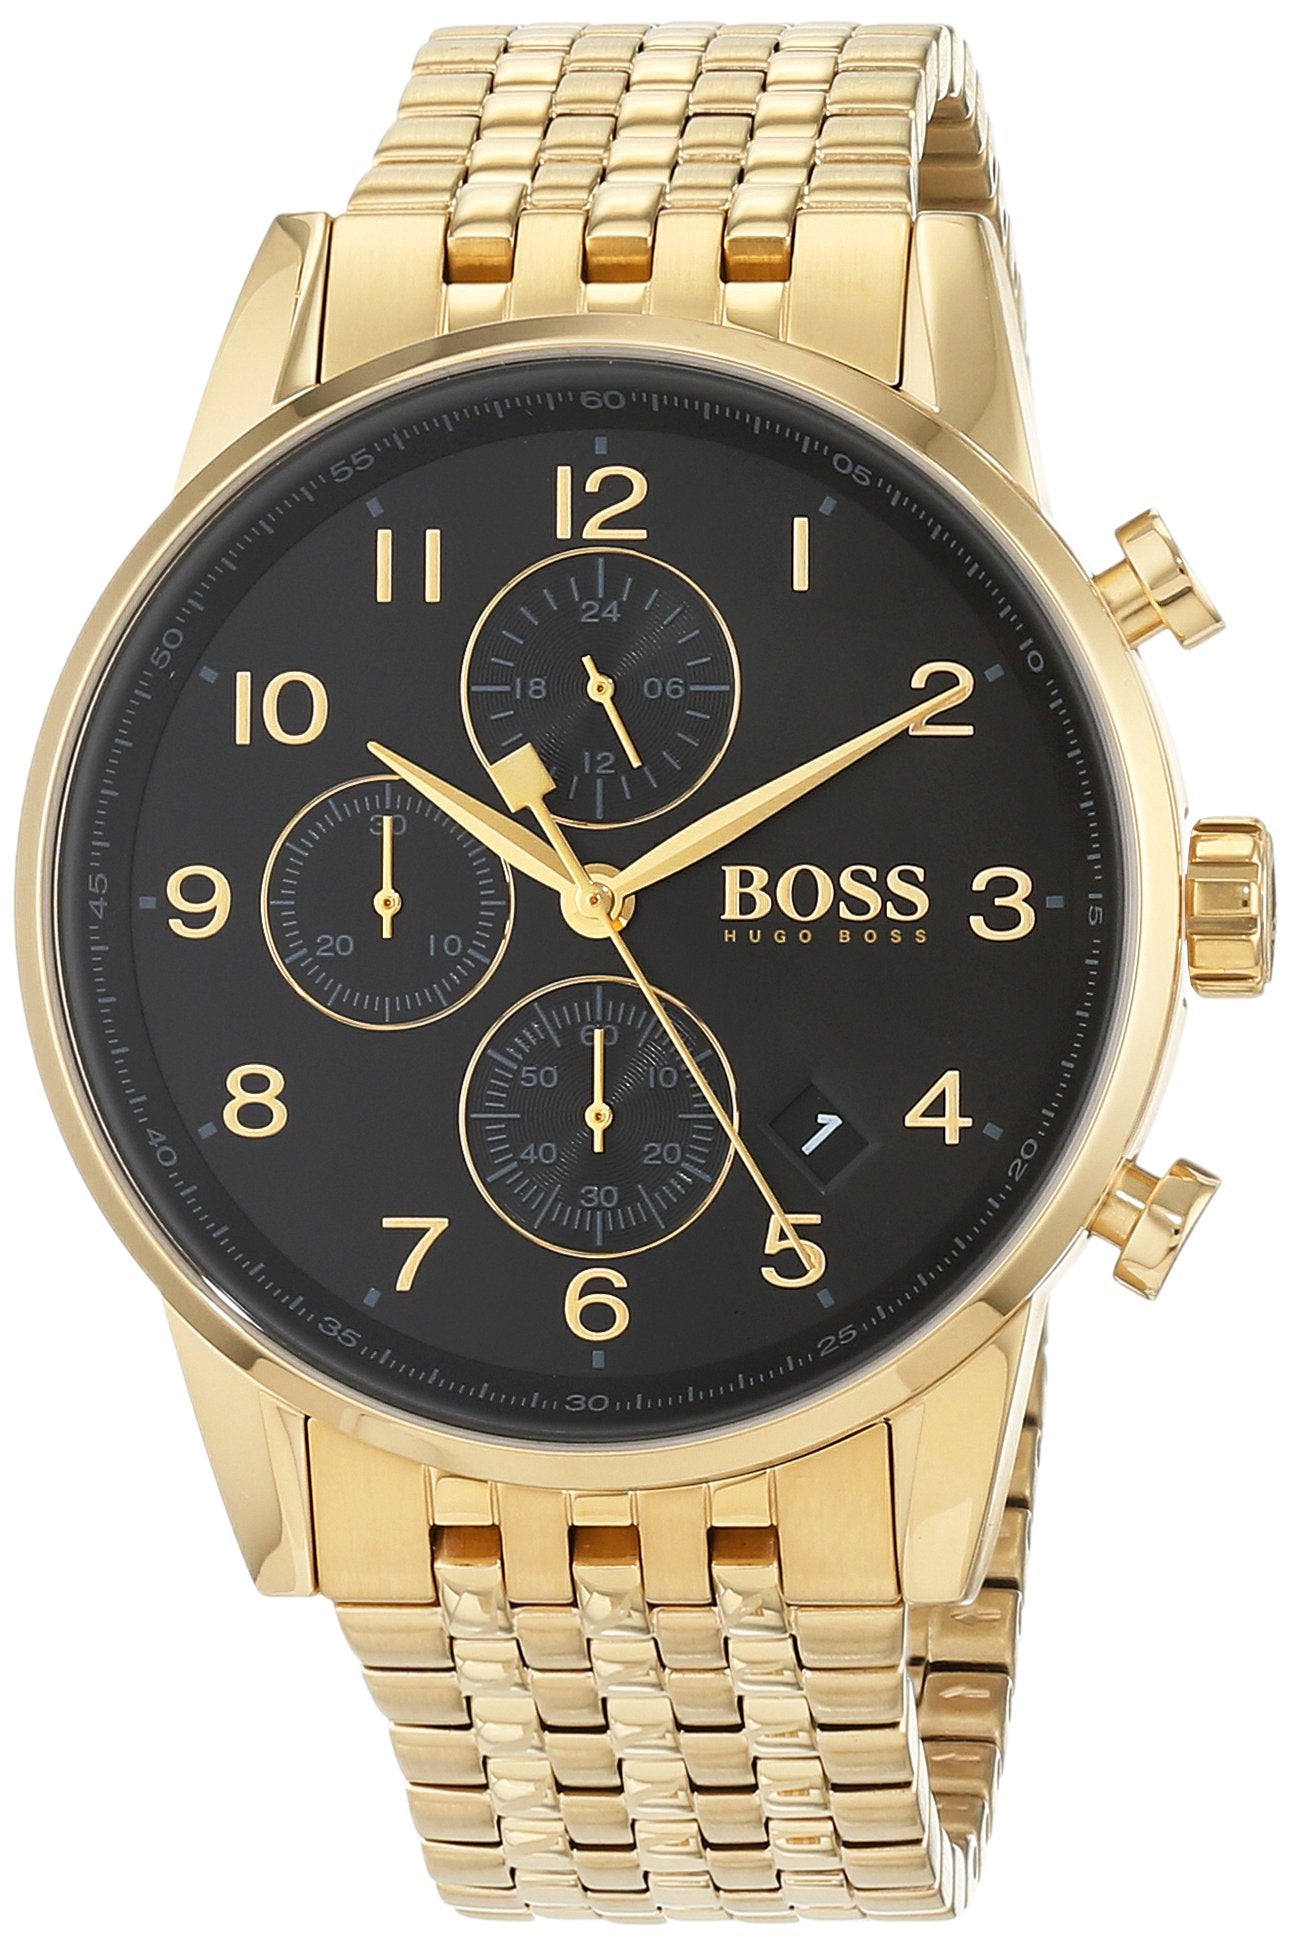 BOSS Men's Chronograph Quartz Watch with Stainless Steel Strap 1513531